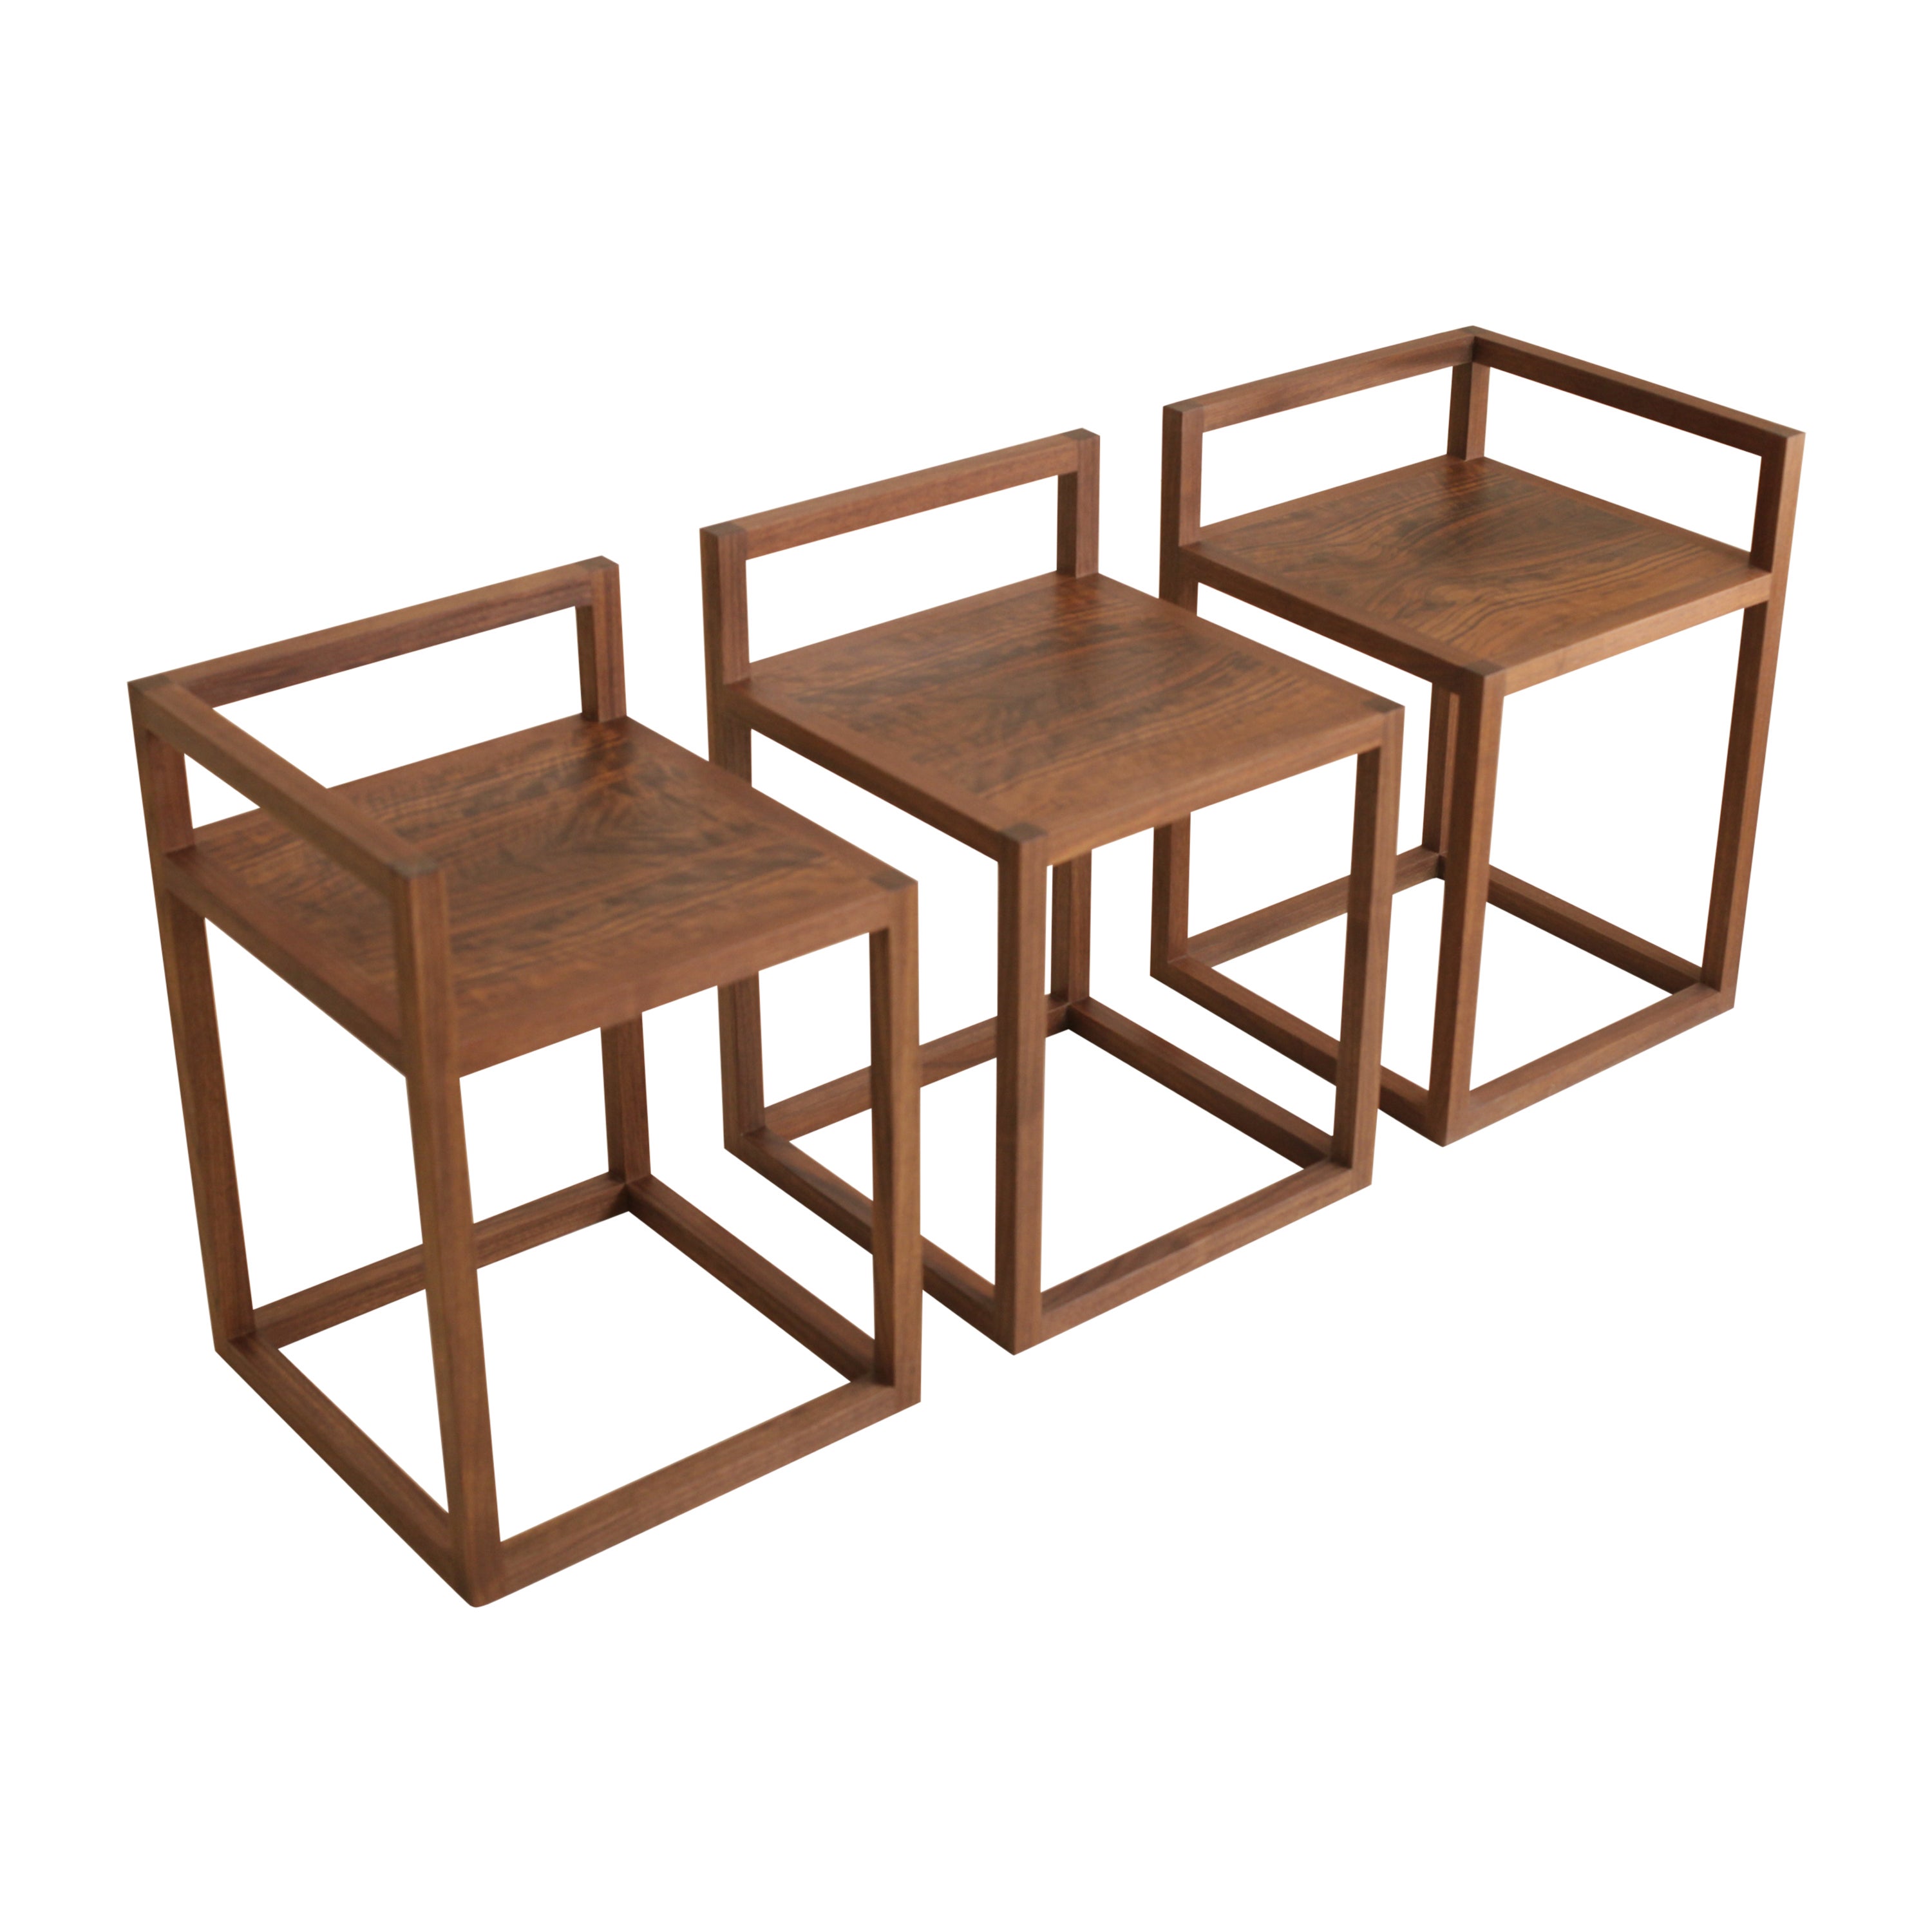 Donald Judd Inspired Bench Seating Trio in Walnut by Boyd & Allister For Sale